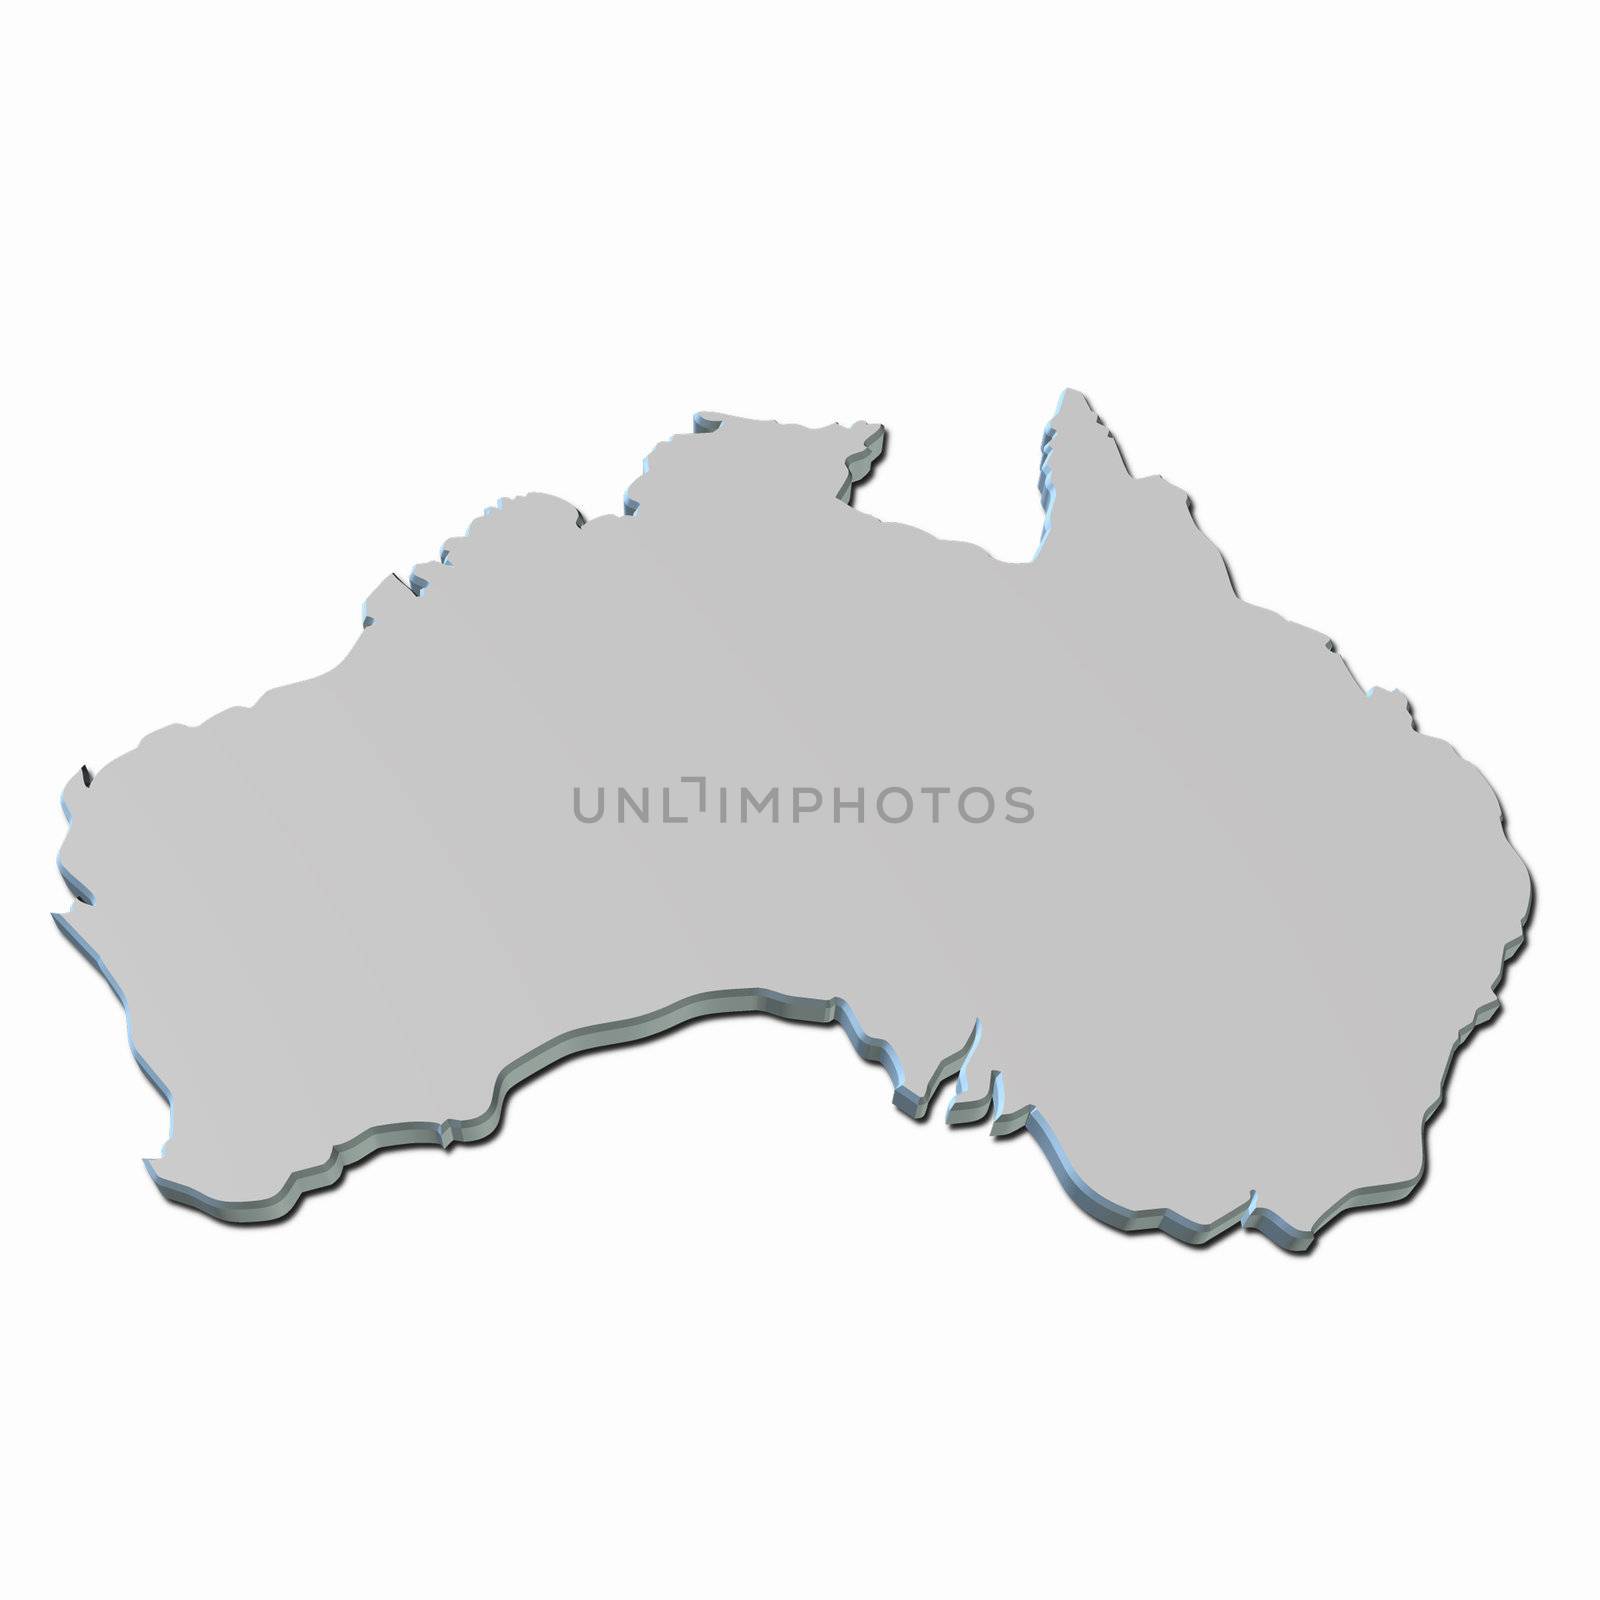 3d map of australia in white color